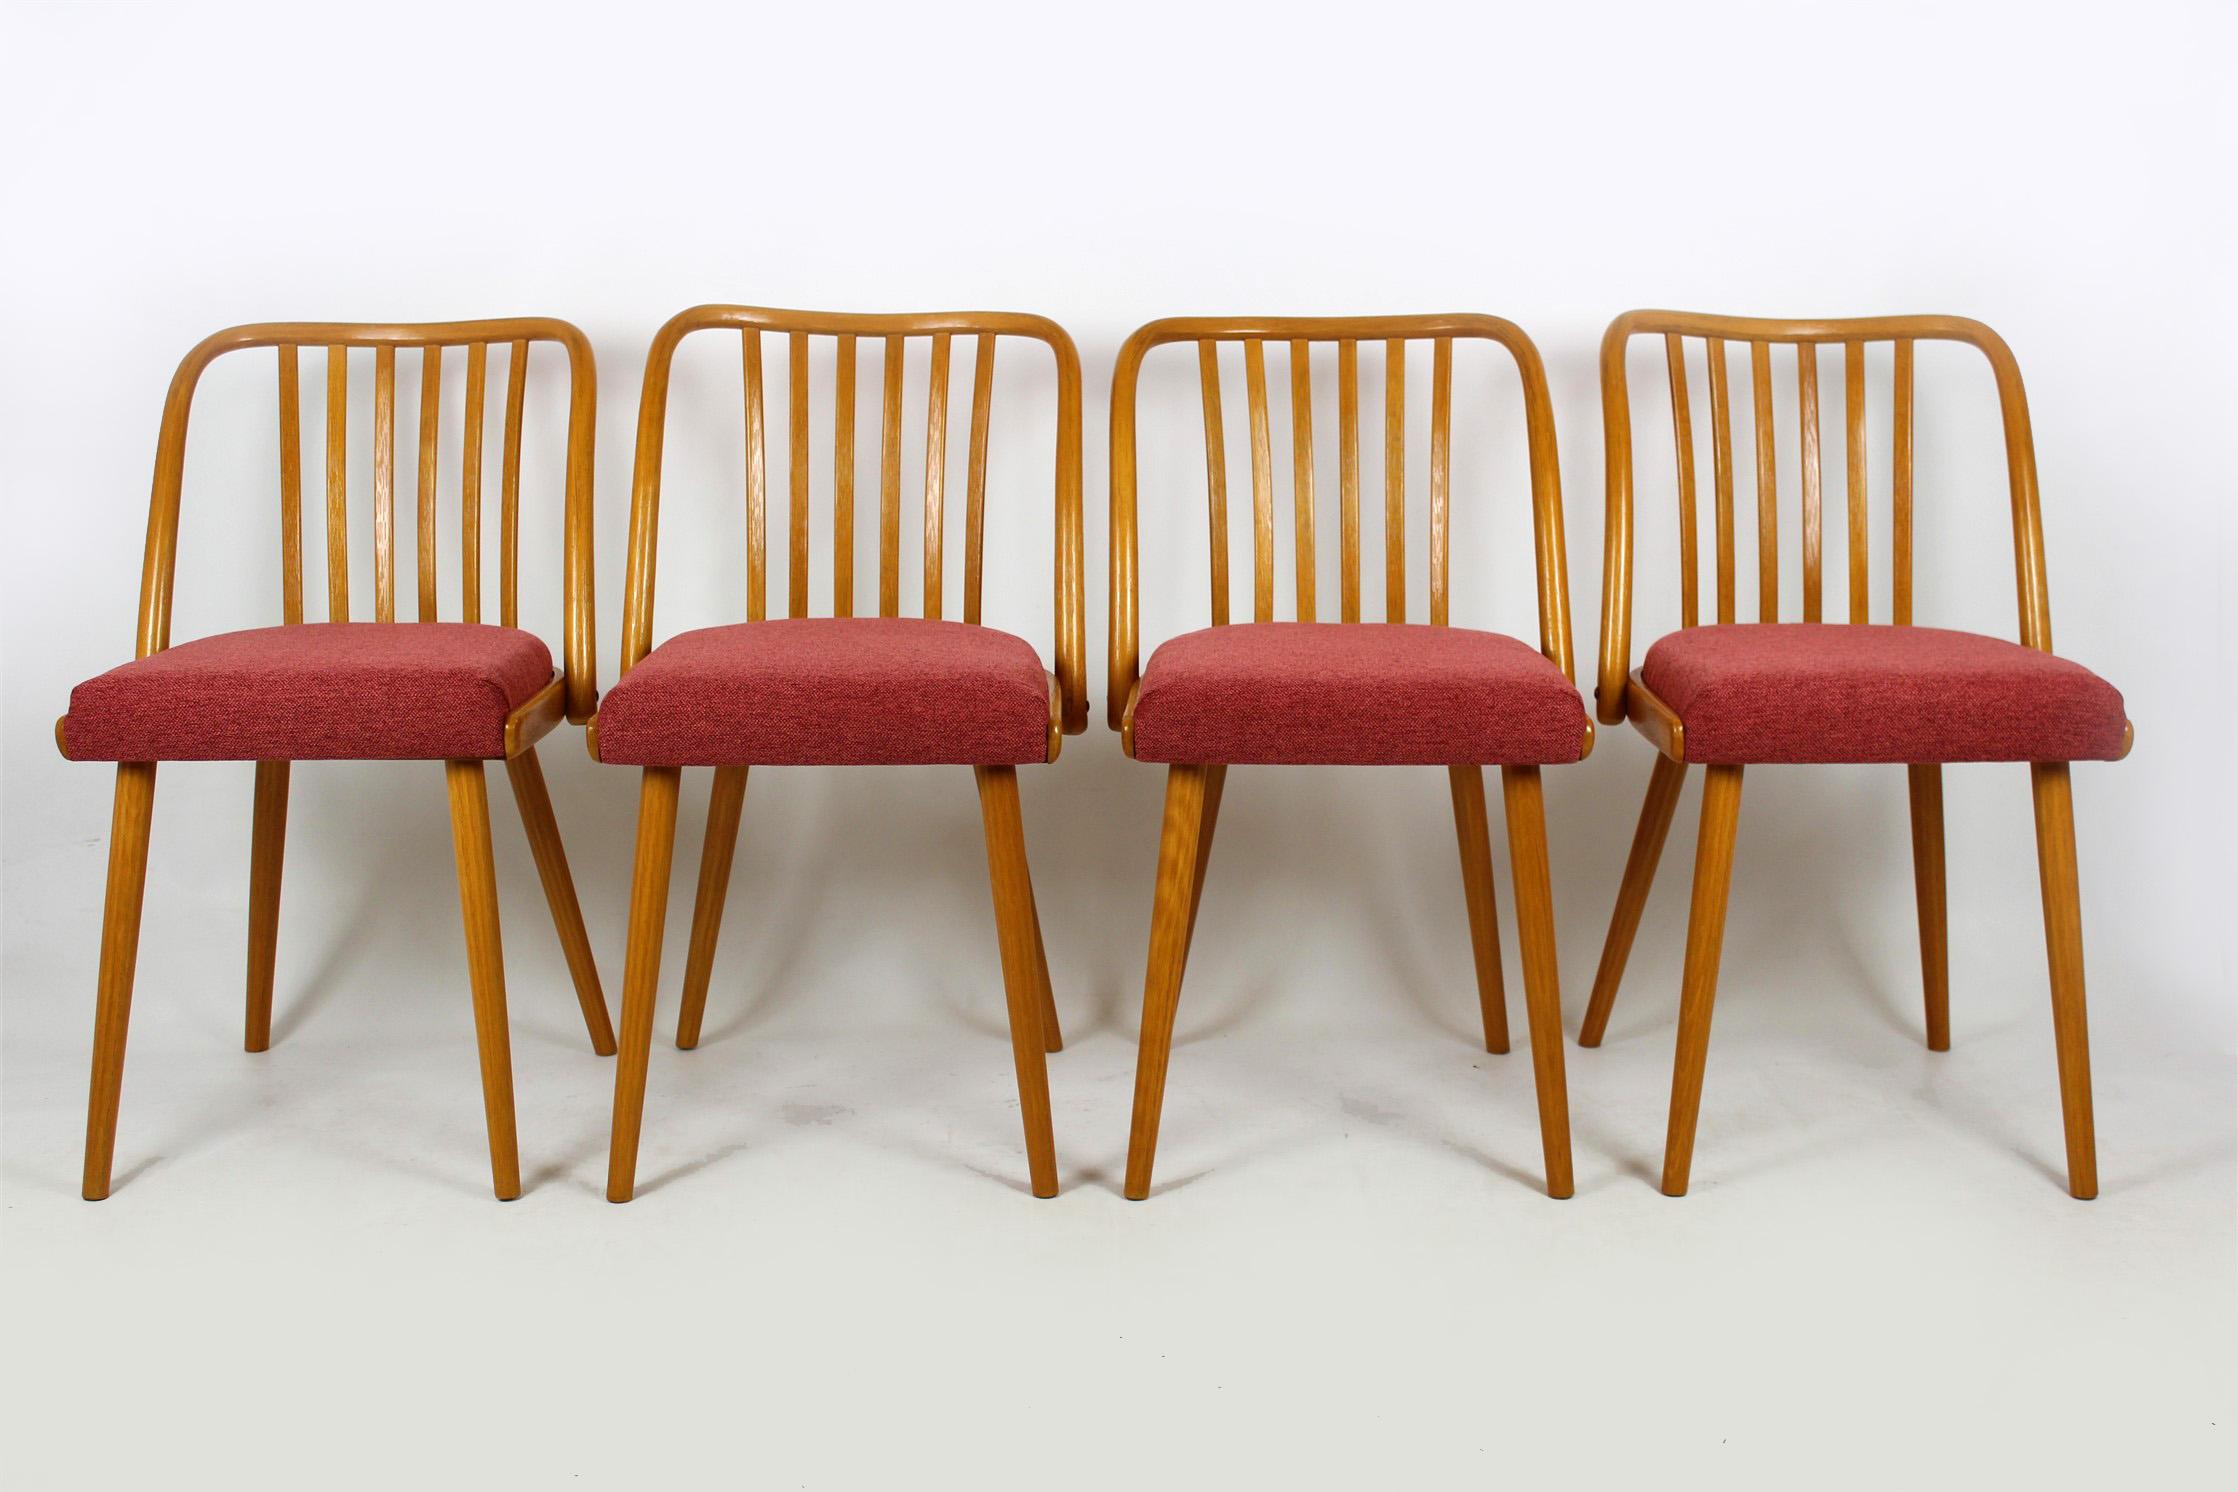 Set of four chairs designed by Antonin Suman, circa 1960 and produced in former Czechoslovakia.
Made of lacquered beech bentwood, seats upholstered with new dirt/abrasion resistant fabric upholstery.